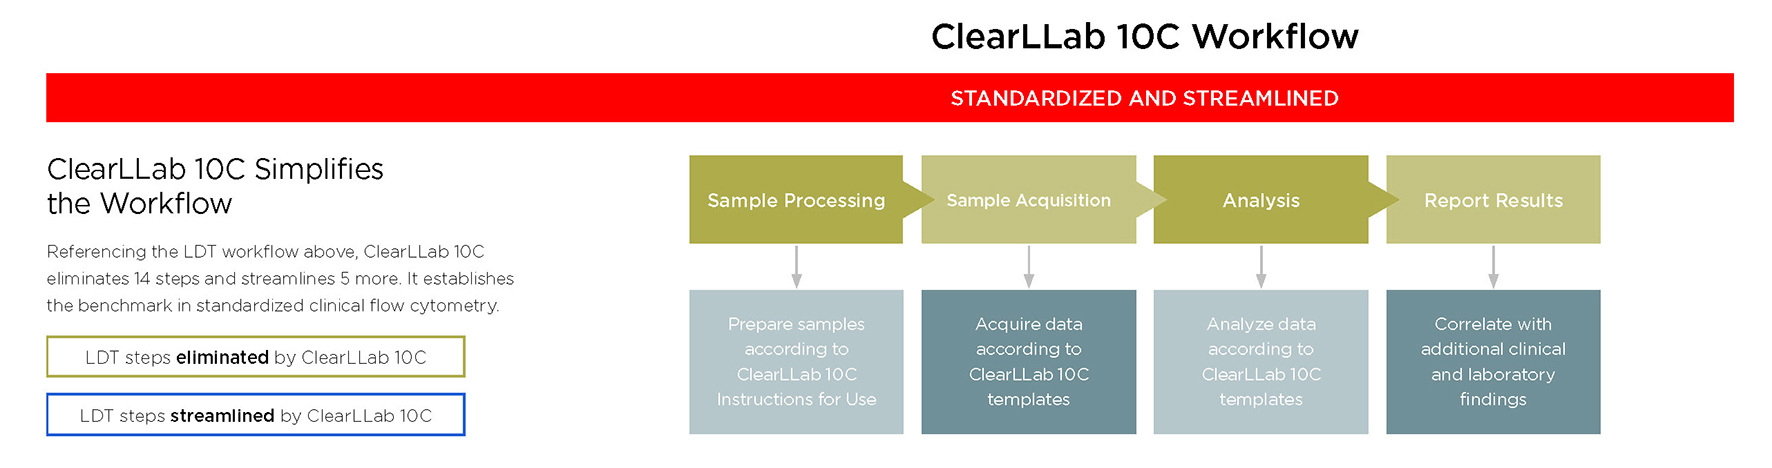 ClearLLab 10C Workflow